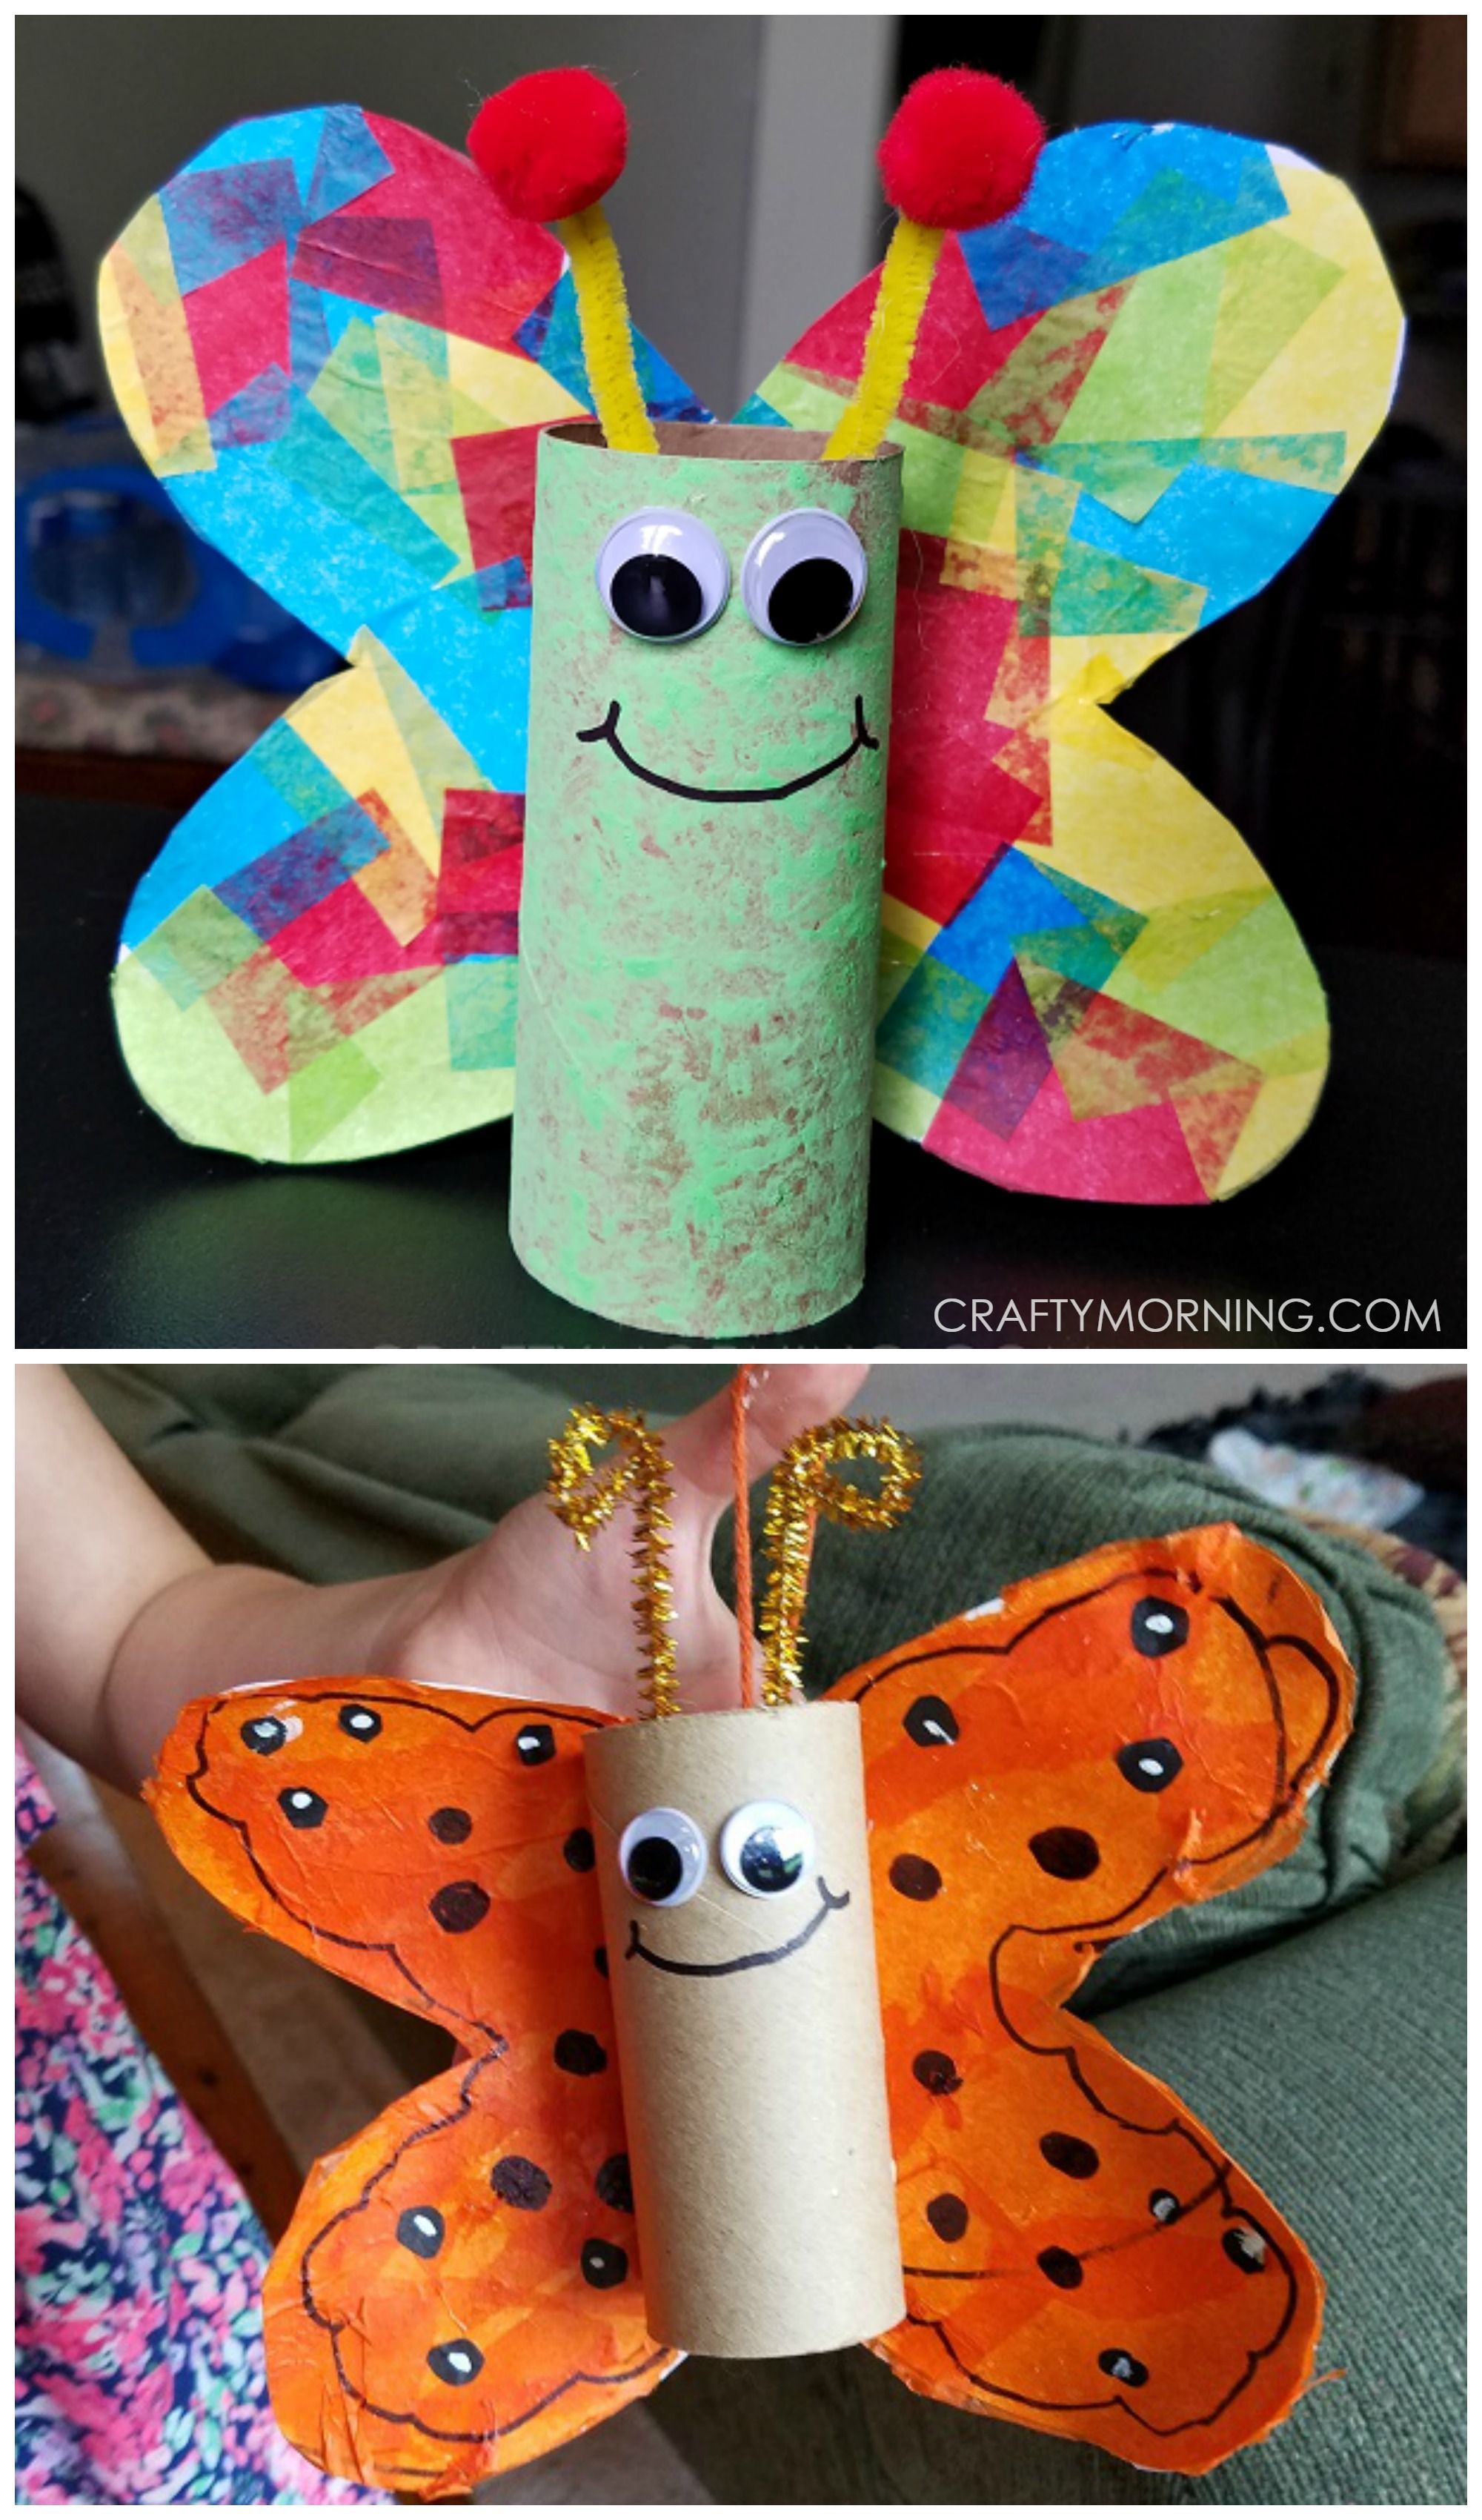 Cardboard tube butterfly craft for kids to make! Perfect for spring or summer. Use toilet paper rolls or paper towel rolls. -   25 cardboard crafts kids
 ideas